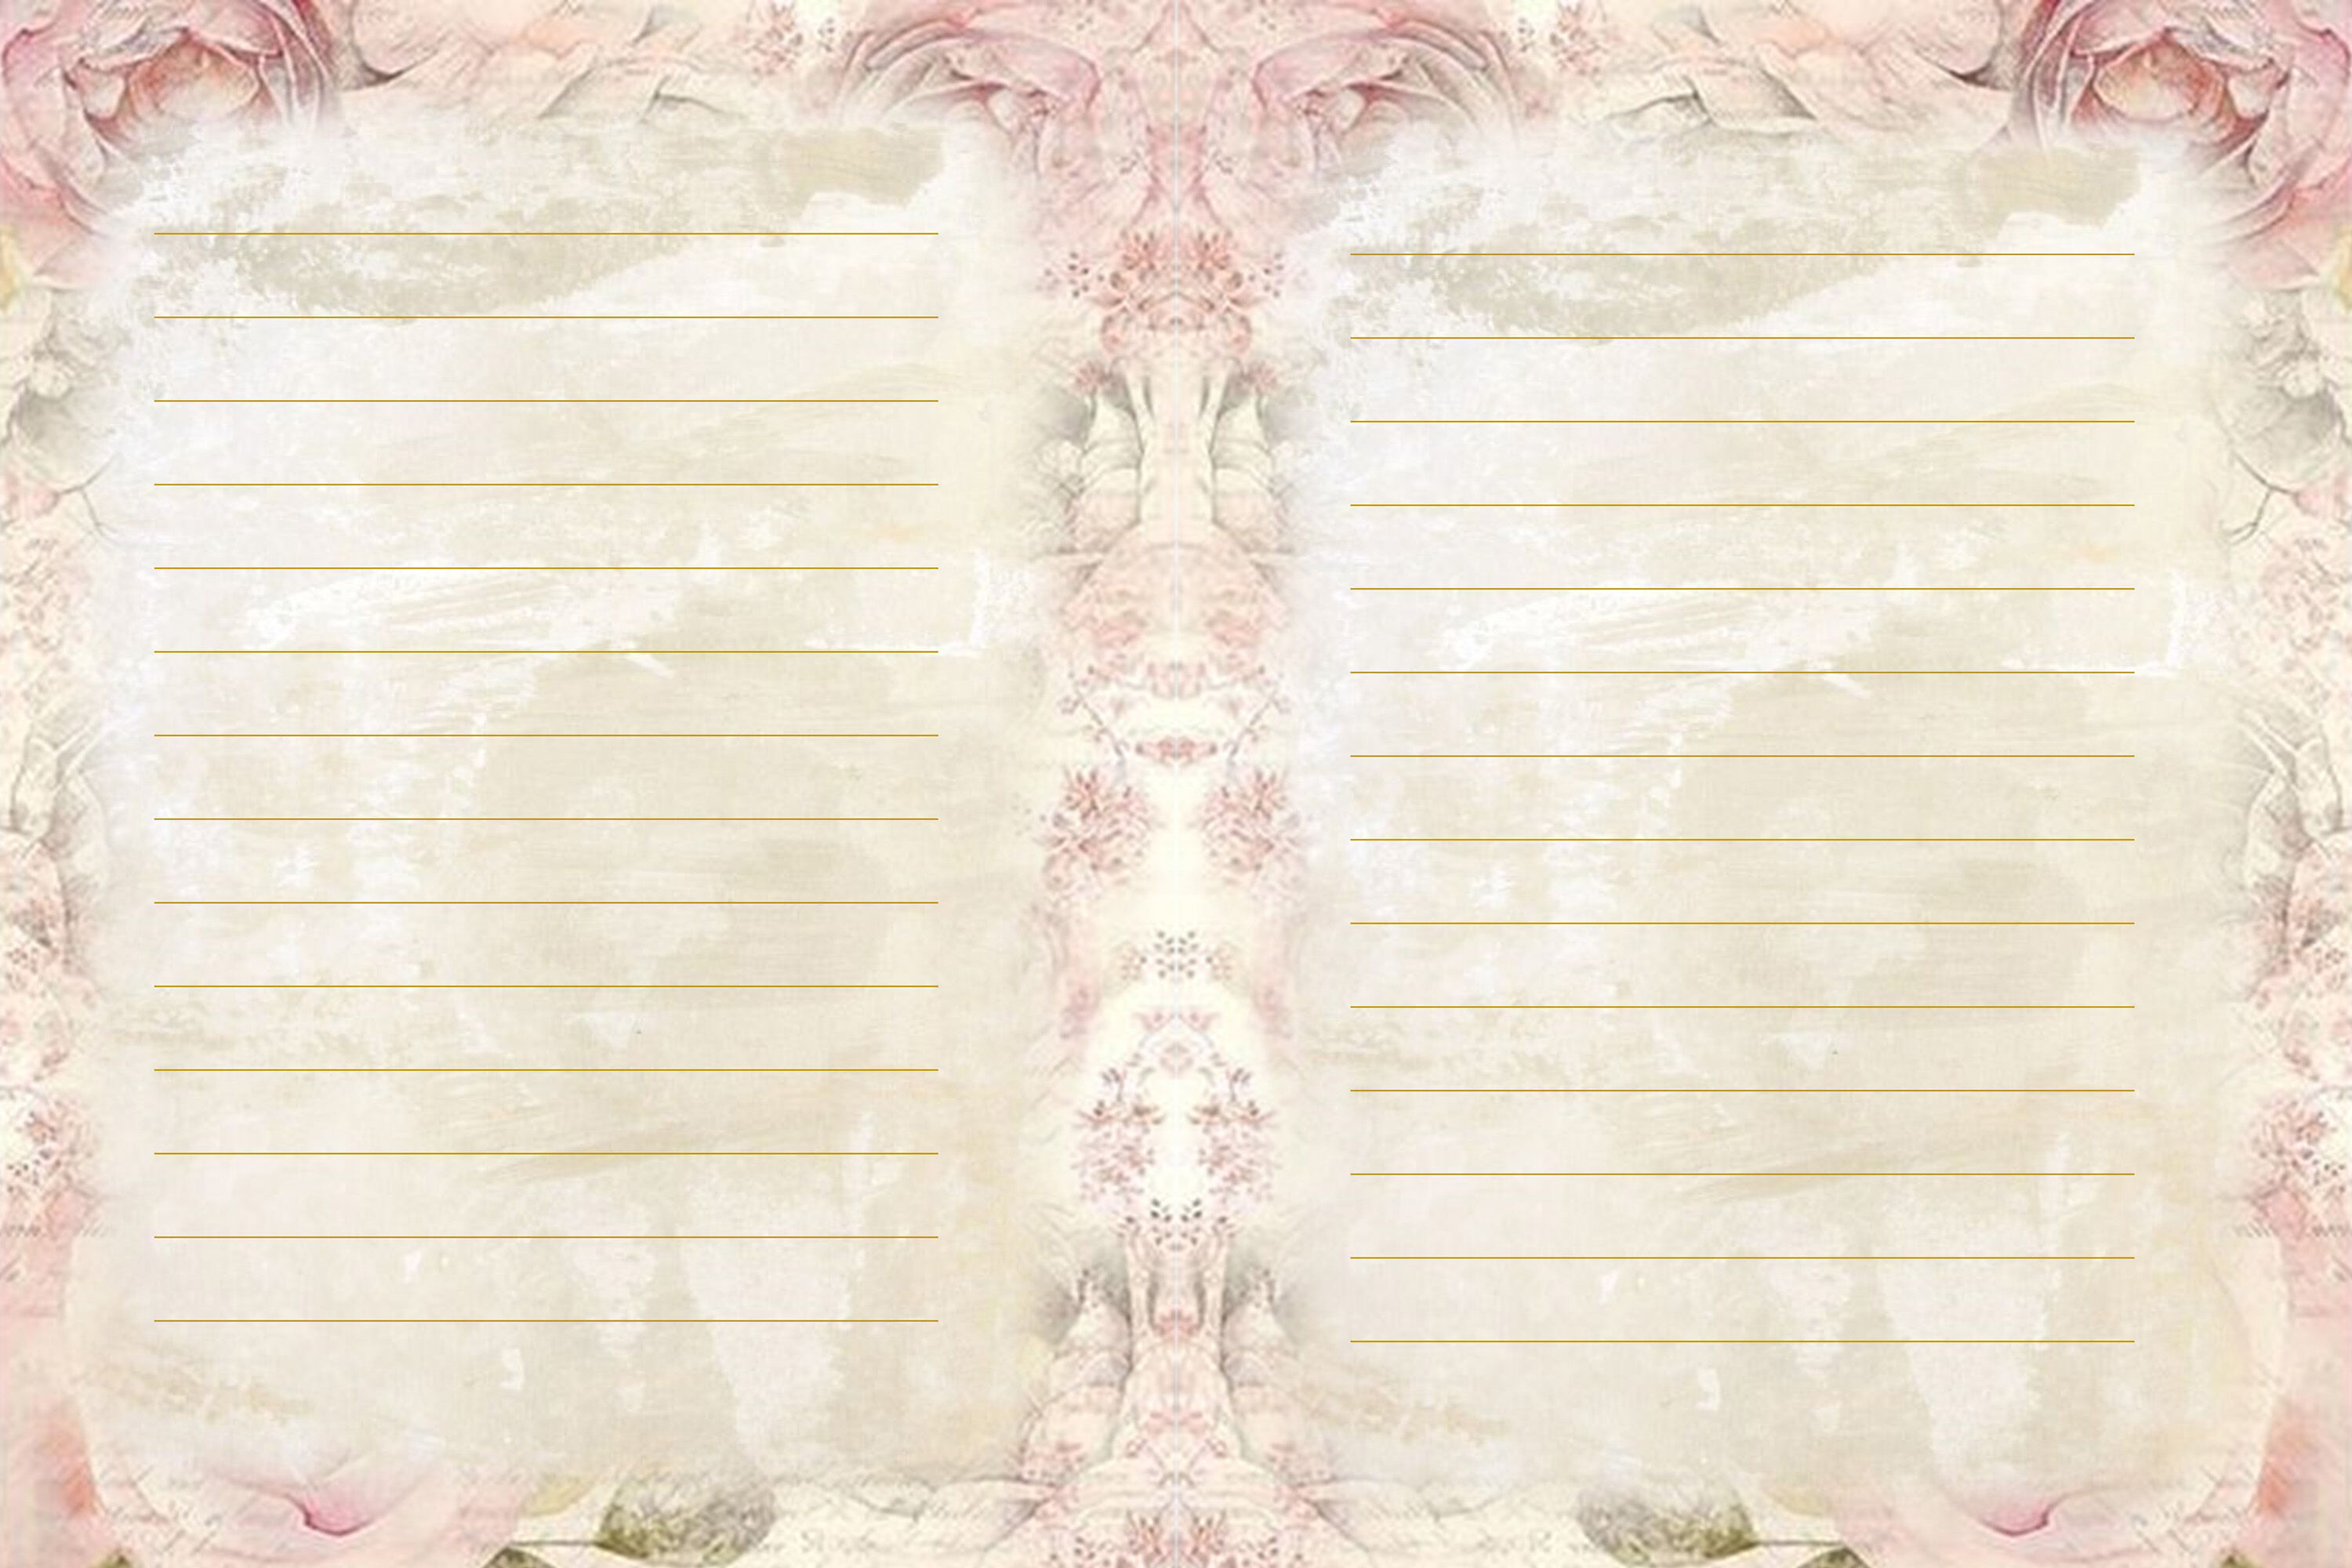 Chic Boudoir II Printable Journal Pages